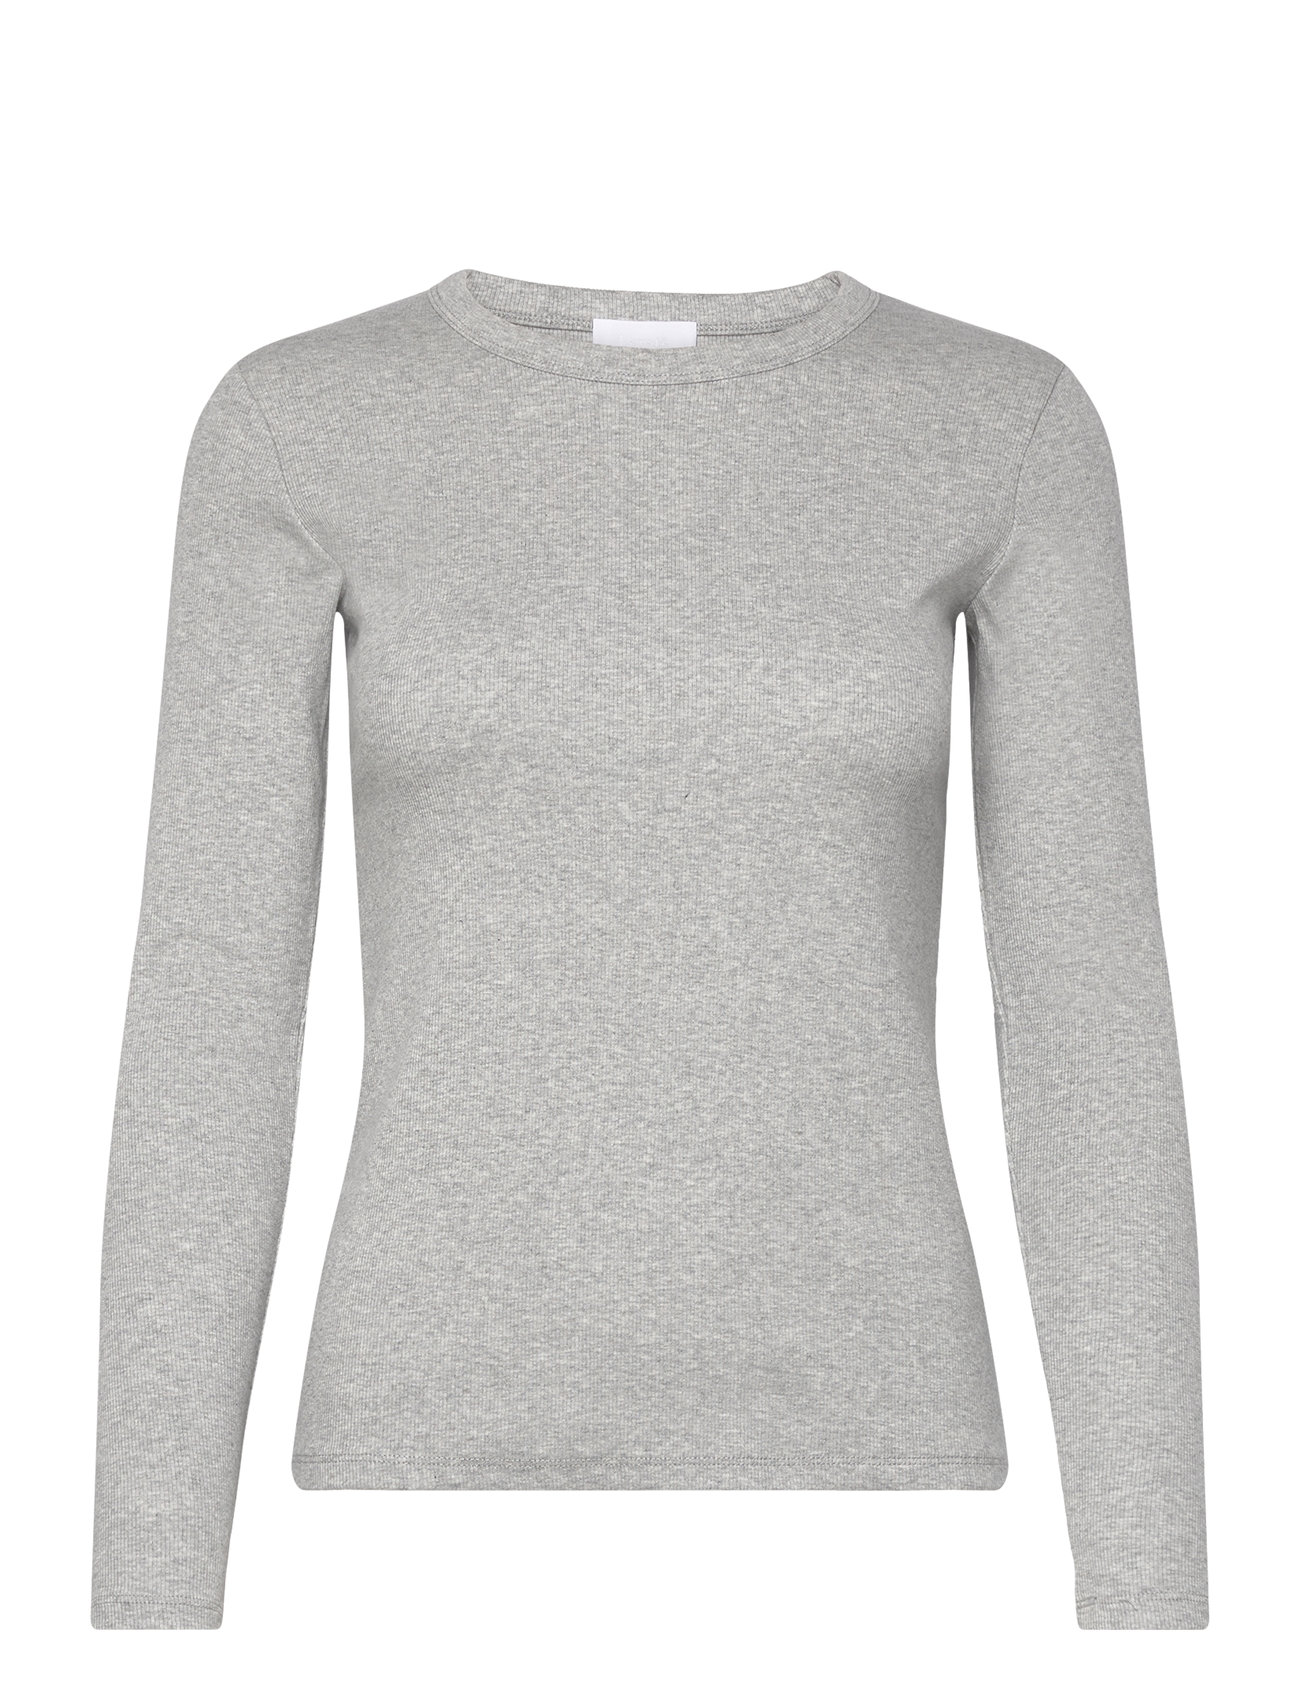 Lr-Numbia Tops T-shirts & Tops Long-sleeved Grey Levete Room